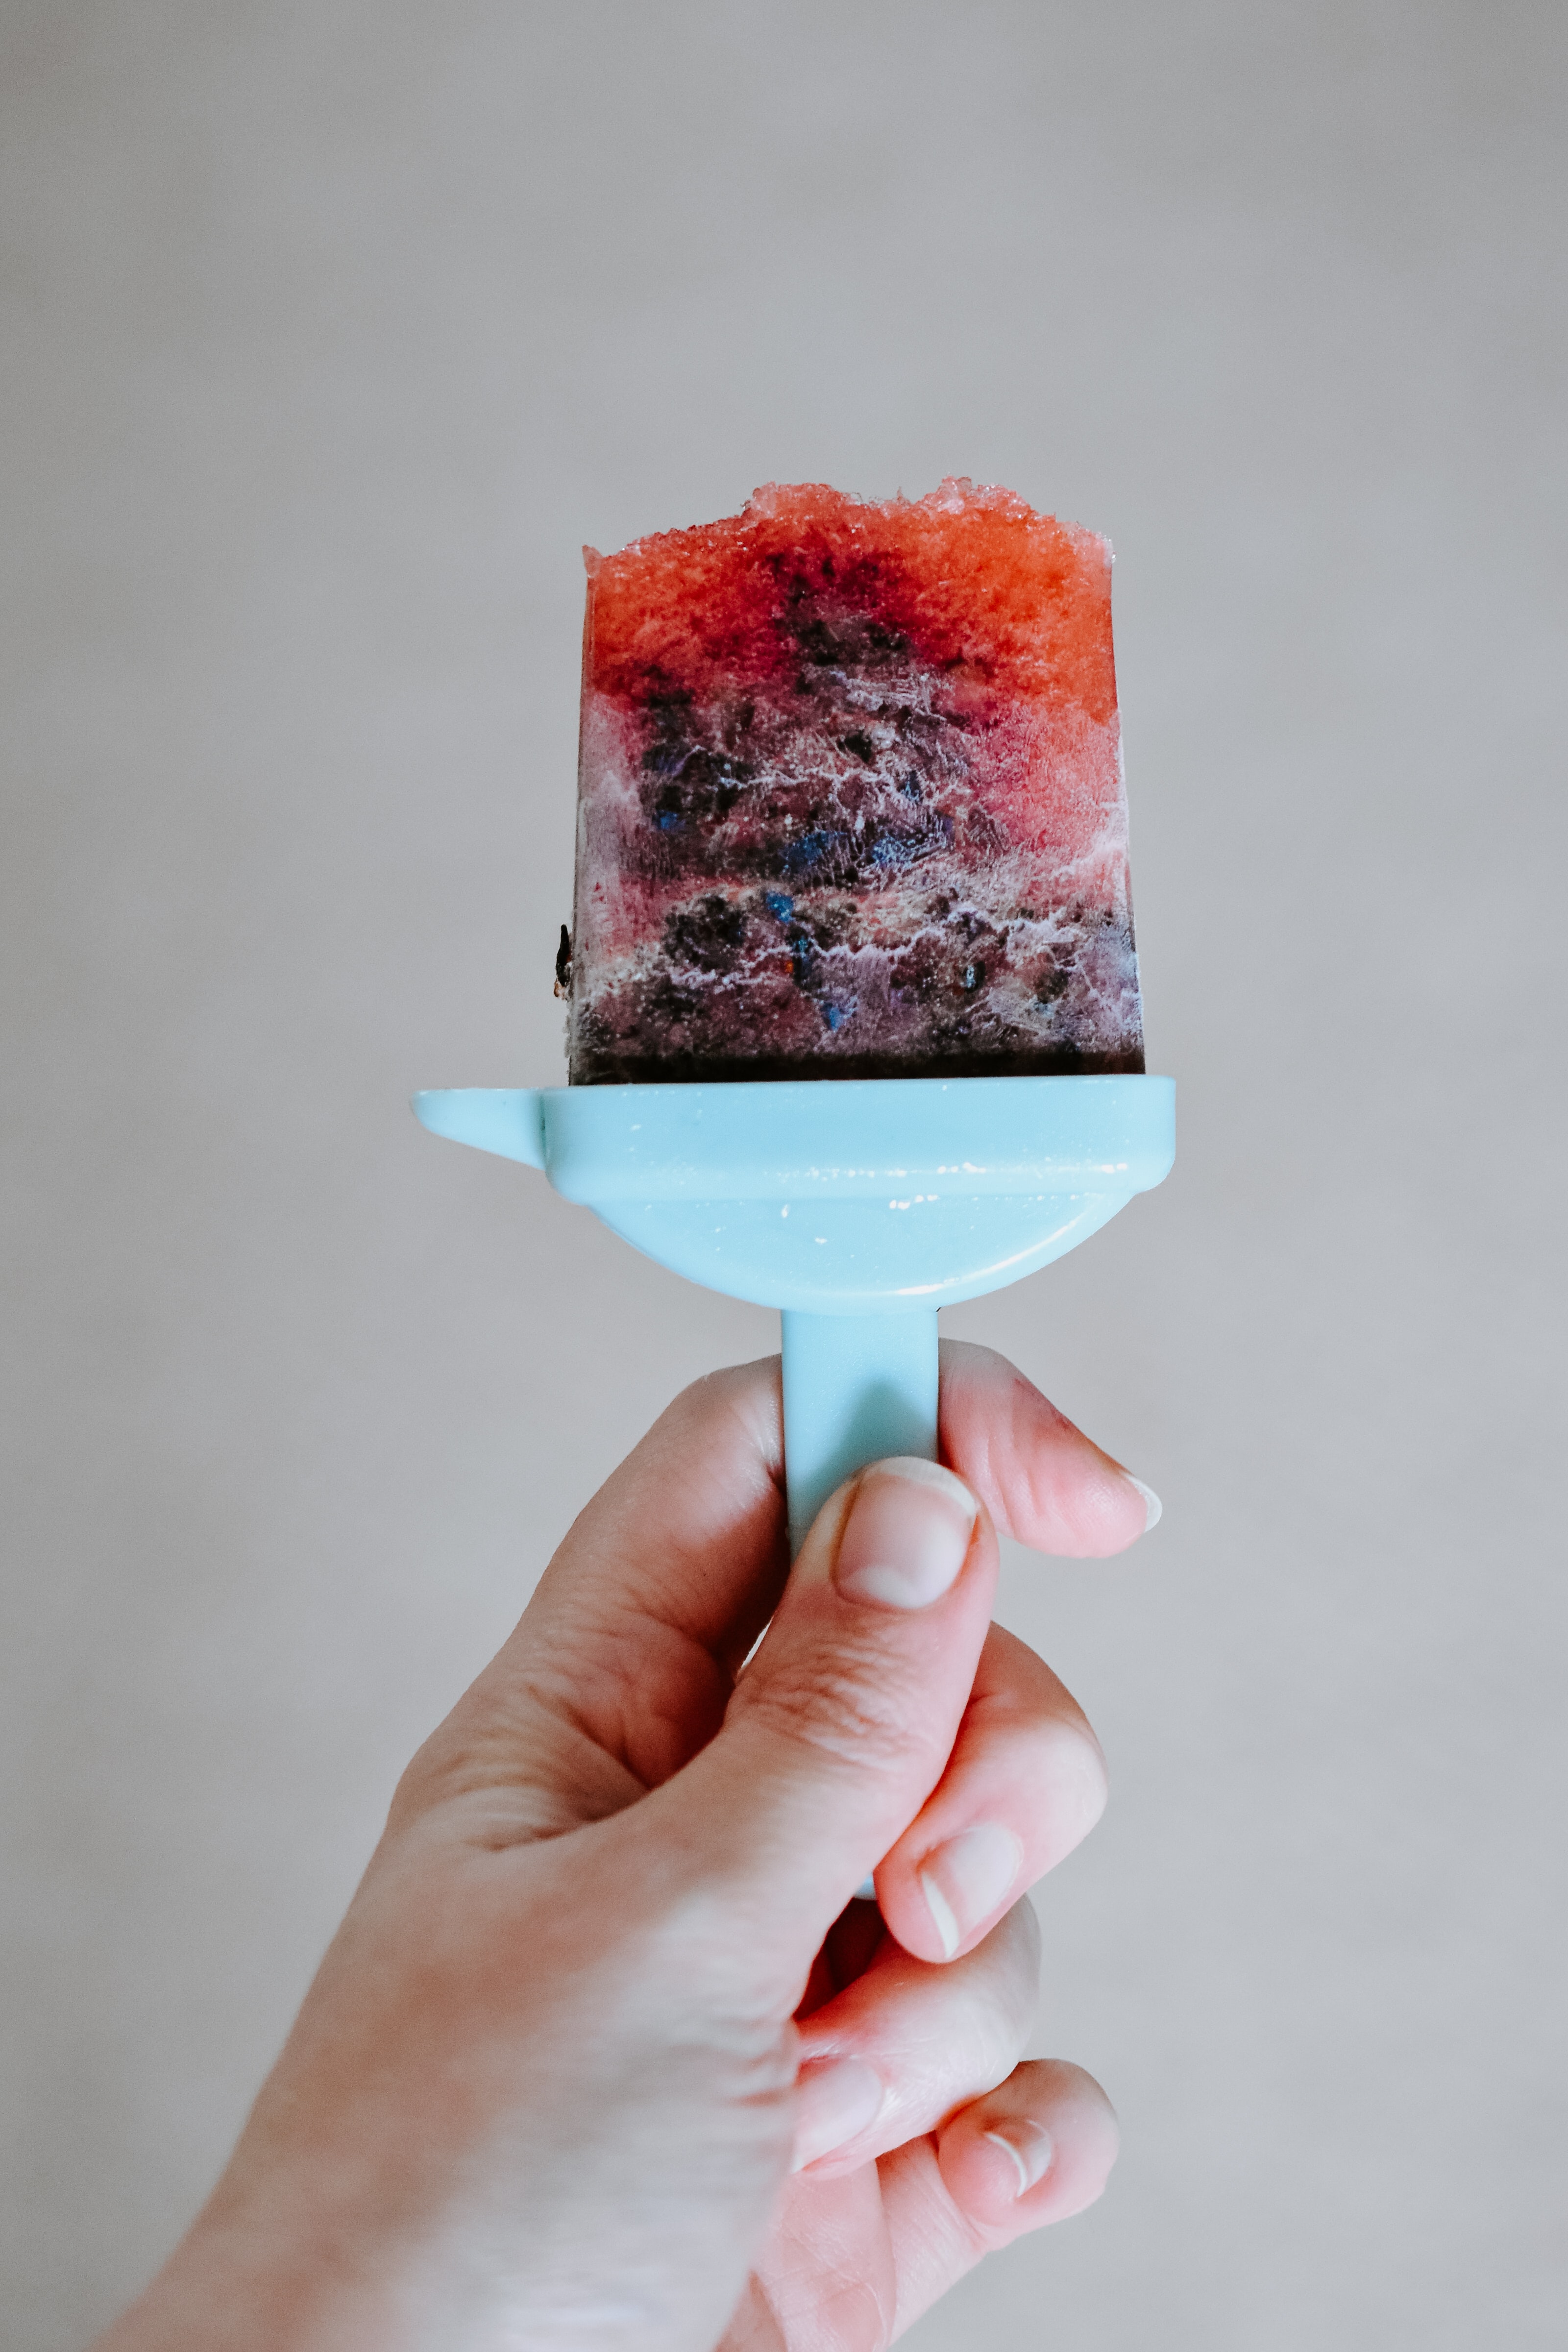 person holding a popsicle made of watermelon and blueberry